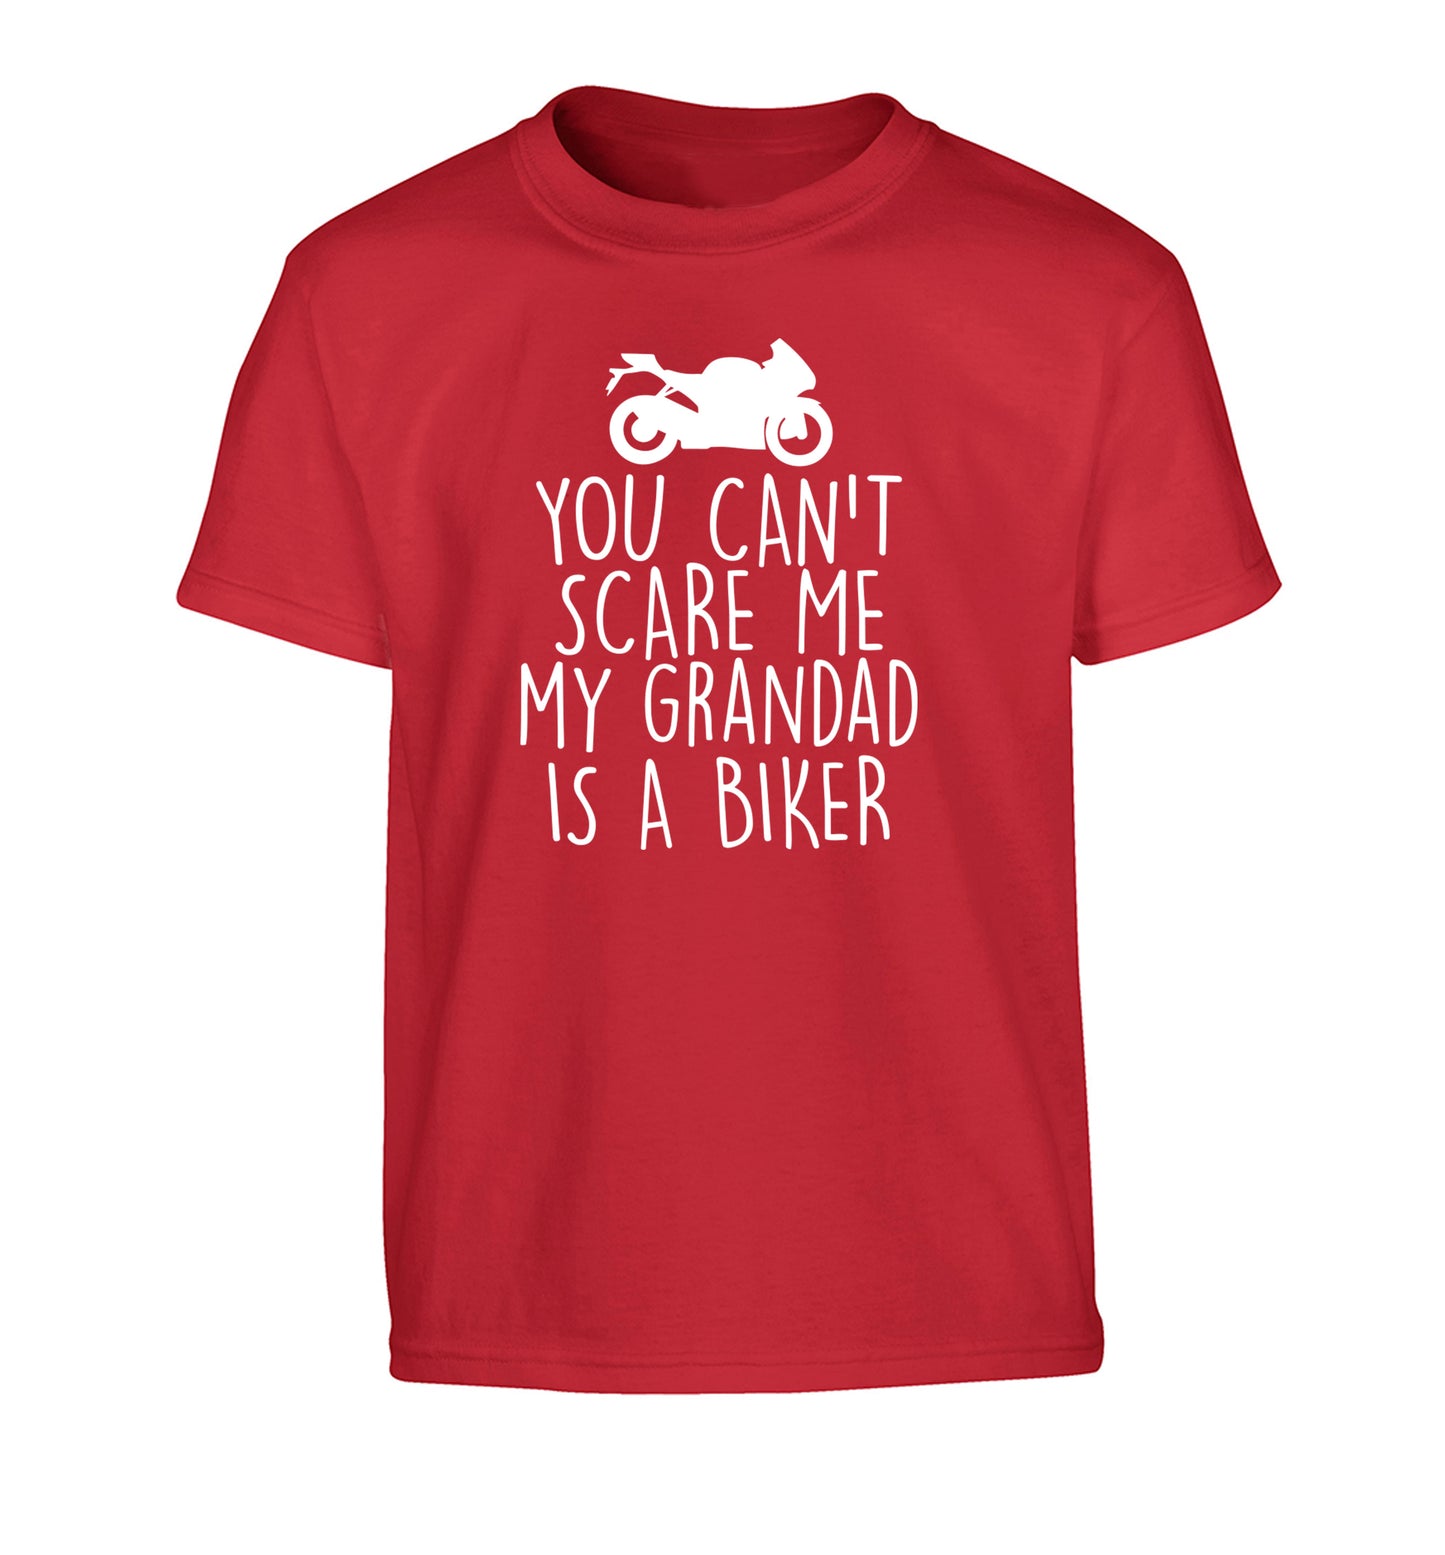 You can't scare me my grandad is a biker Children's red Tshirt 12-13 Years